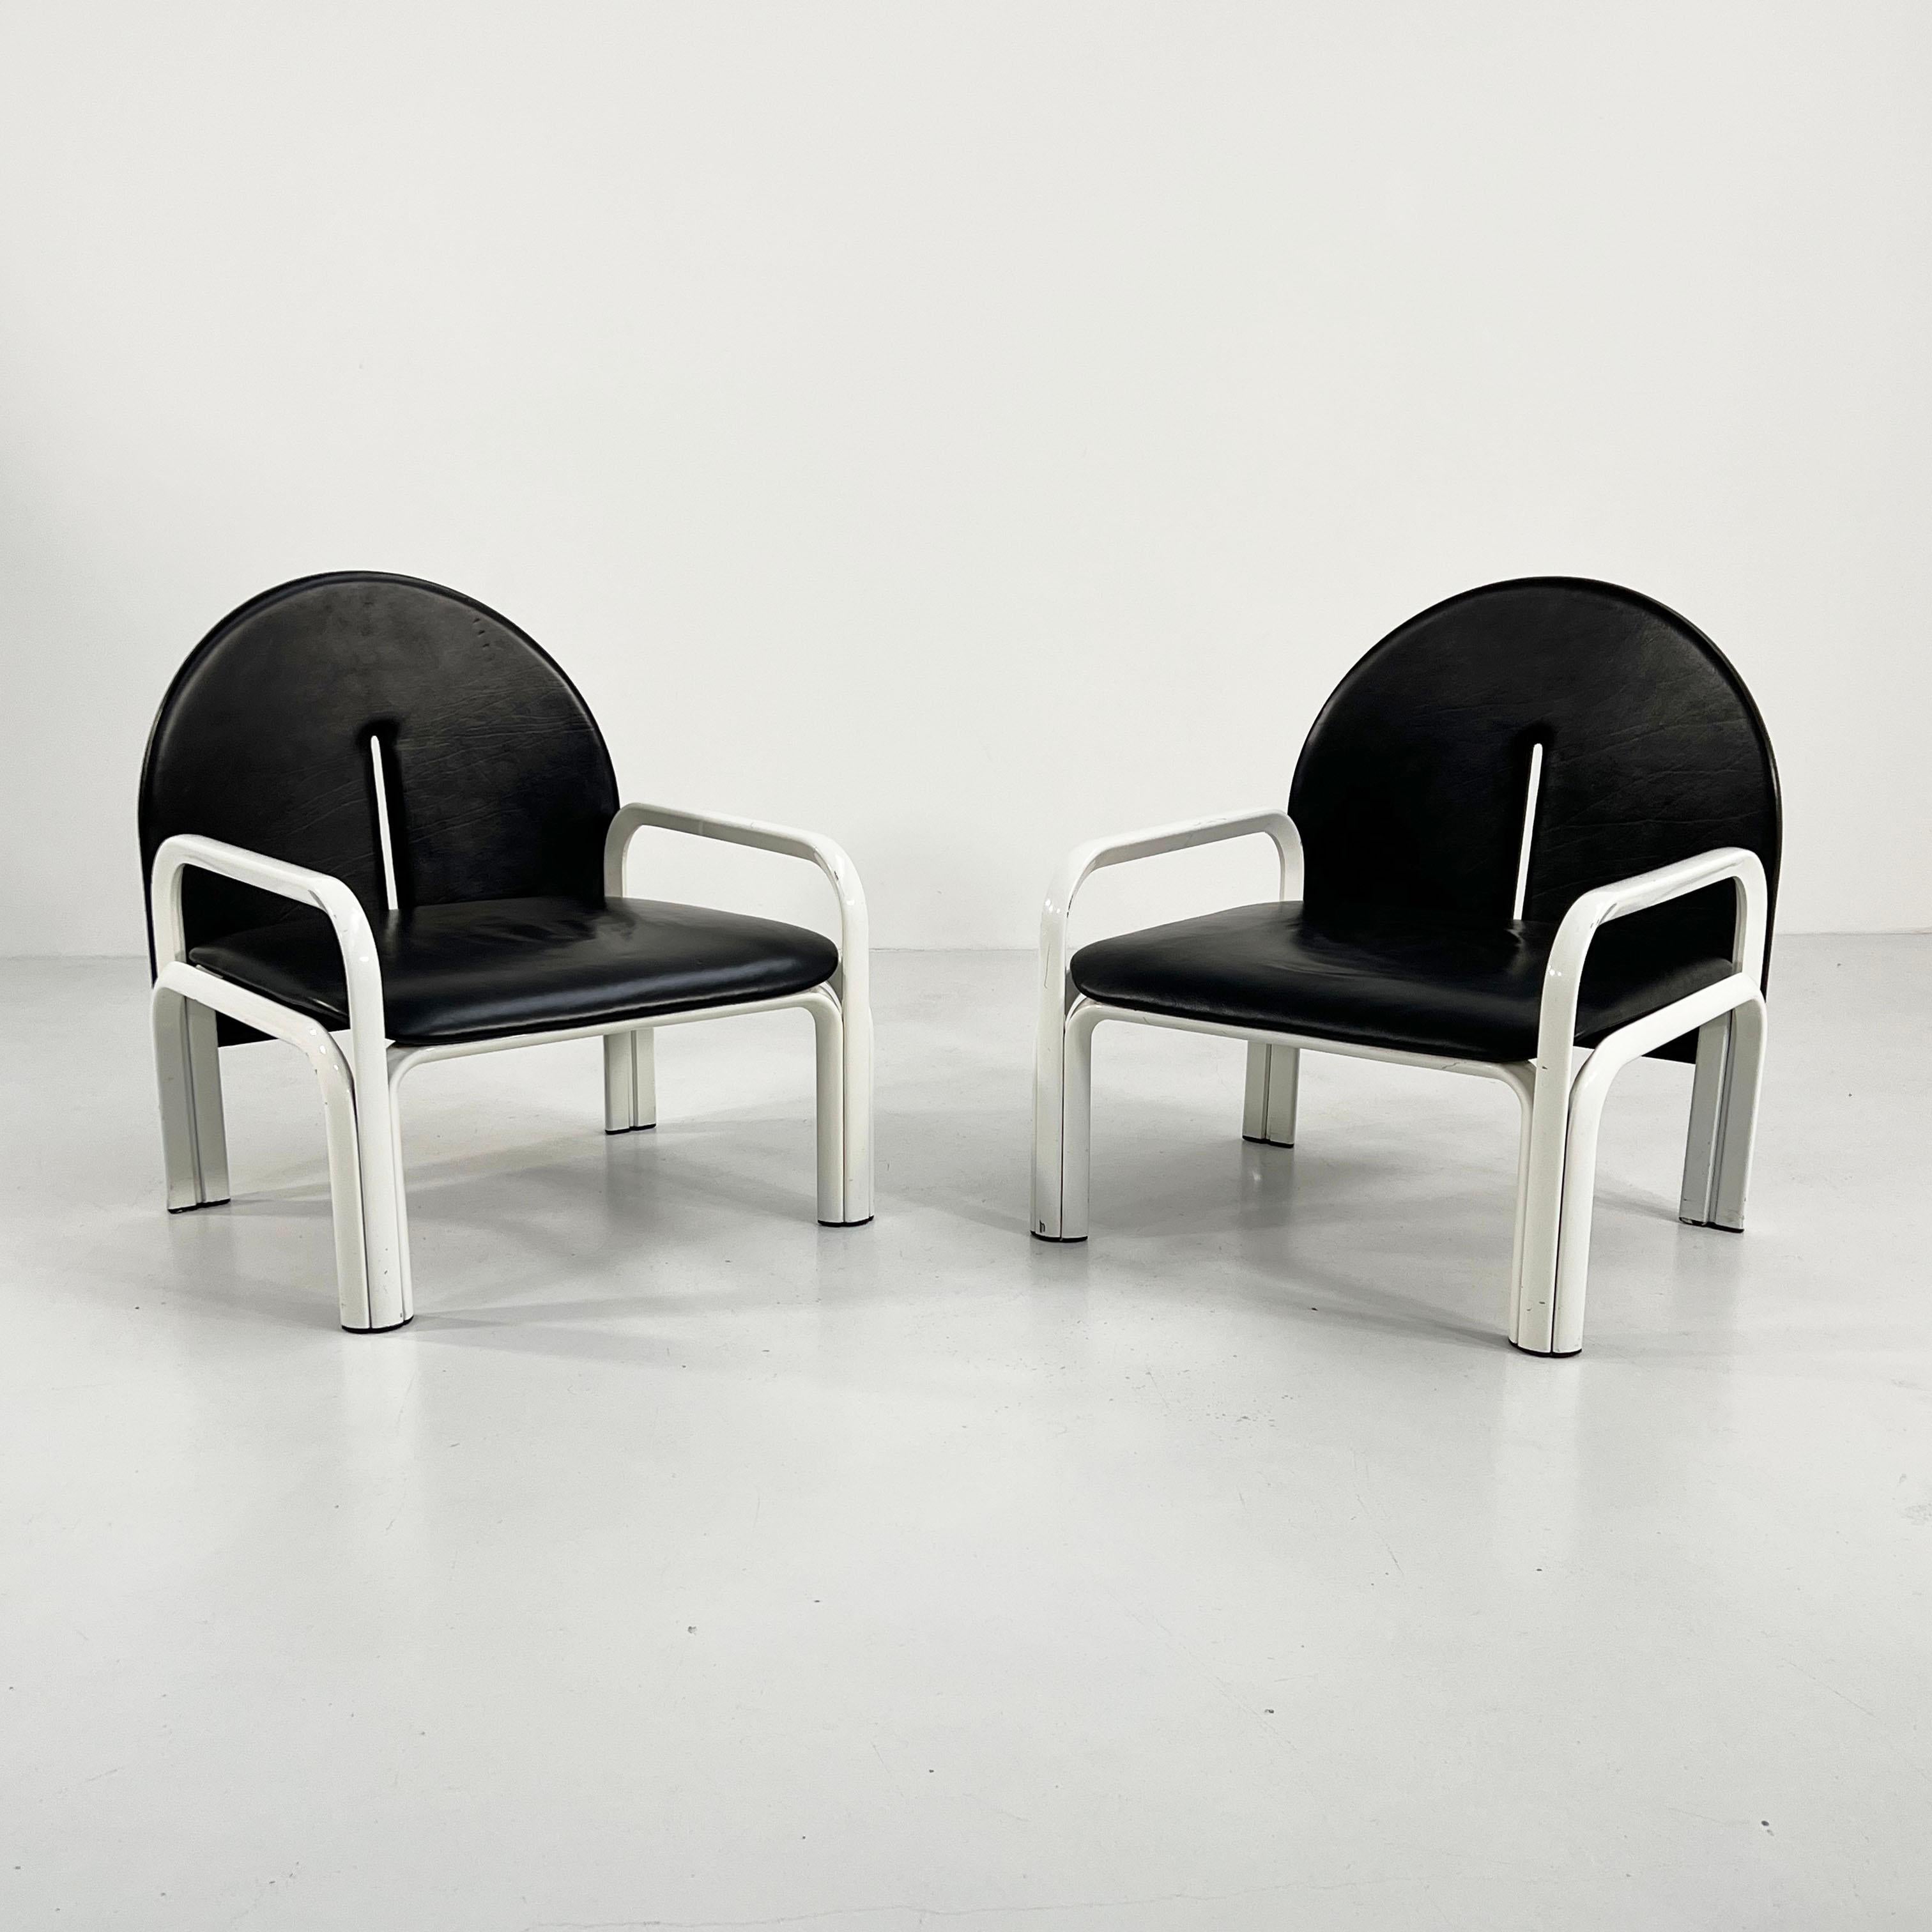 Designer - Gae Aulenti
Producer - Knoll
Model - 54 L Armchairs
Design Period - Seventies 
Measurements - Width 70 cm x Depth 61 cm x Height 77 cm x Seat Height 35 cm
Materials - Leather, Metal
Color - White, Black 
Comments - Light wear consistent